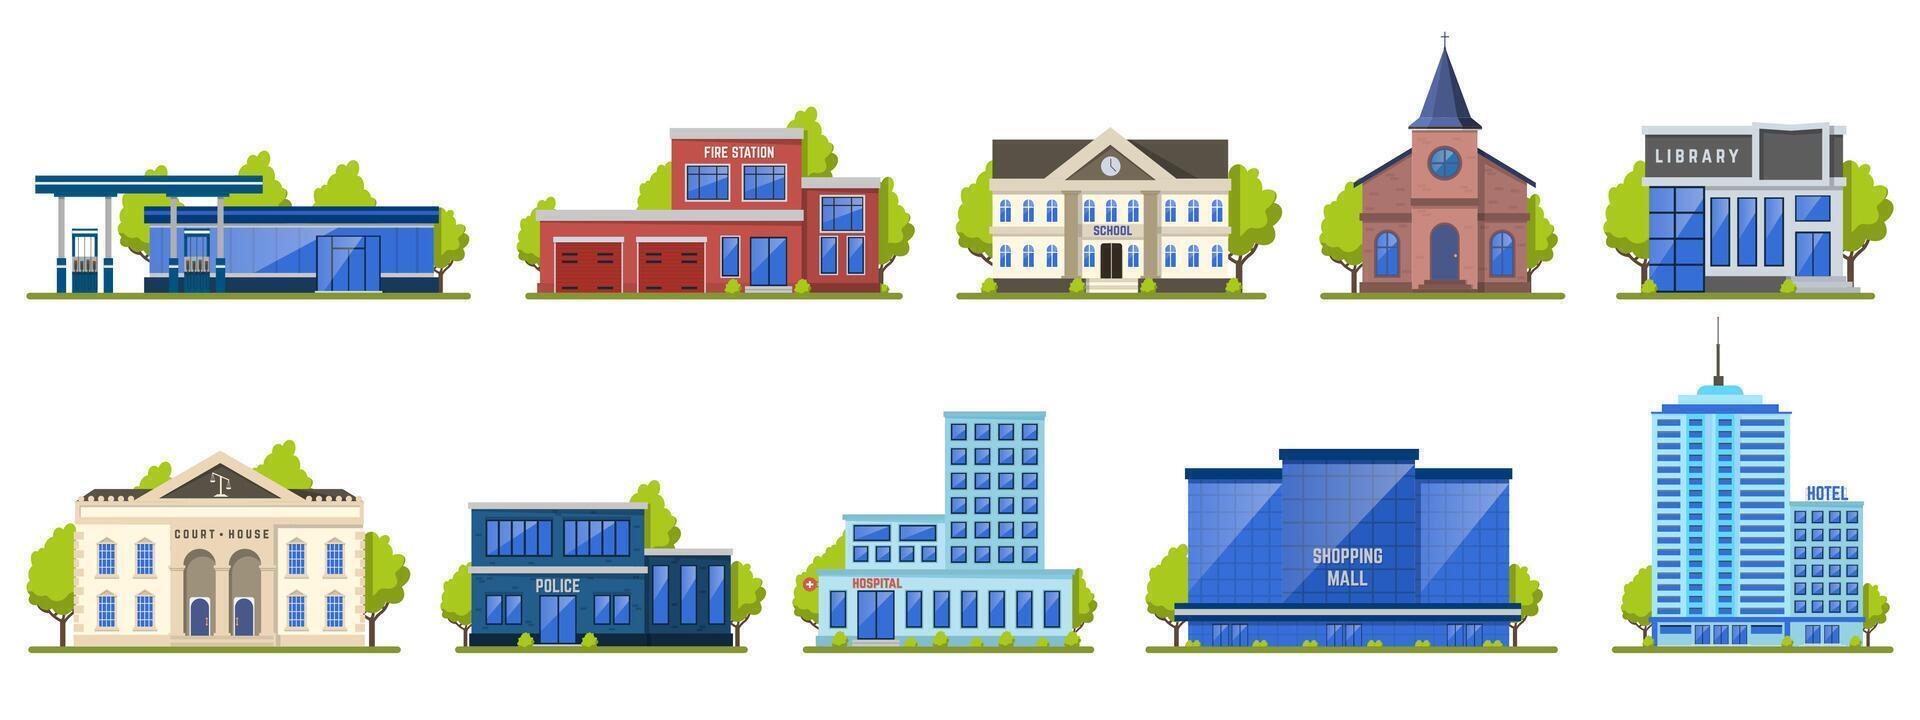 Modern city building. Public contemporary shopping center exterior, school facade, hotel and fire station isolated vector illustration icons set